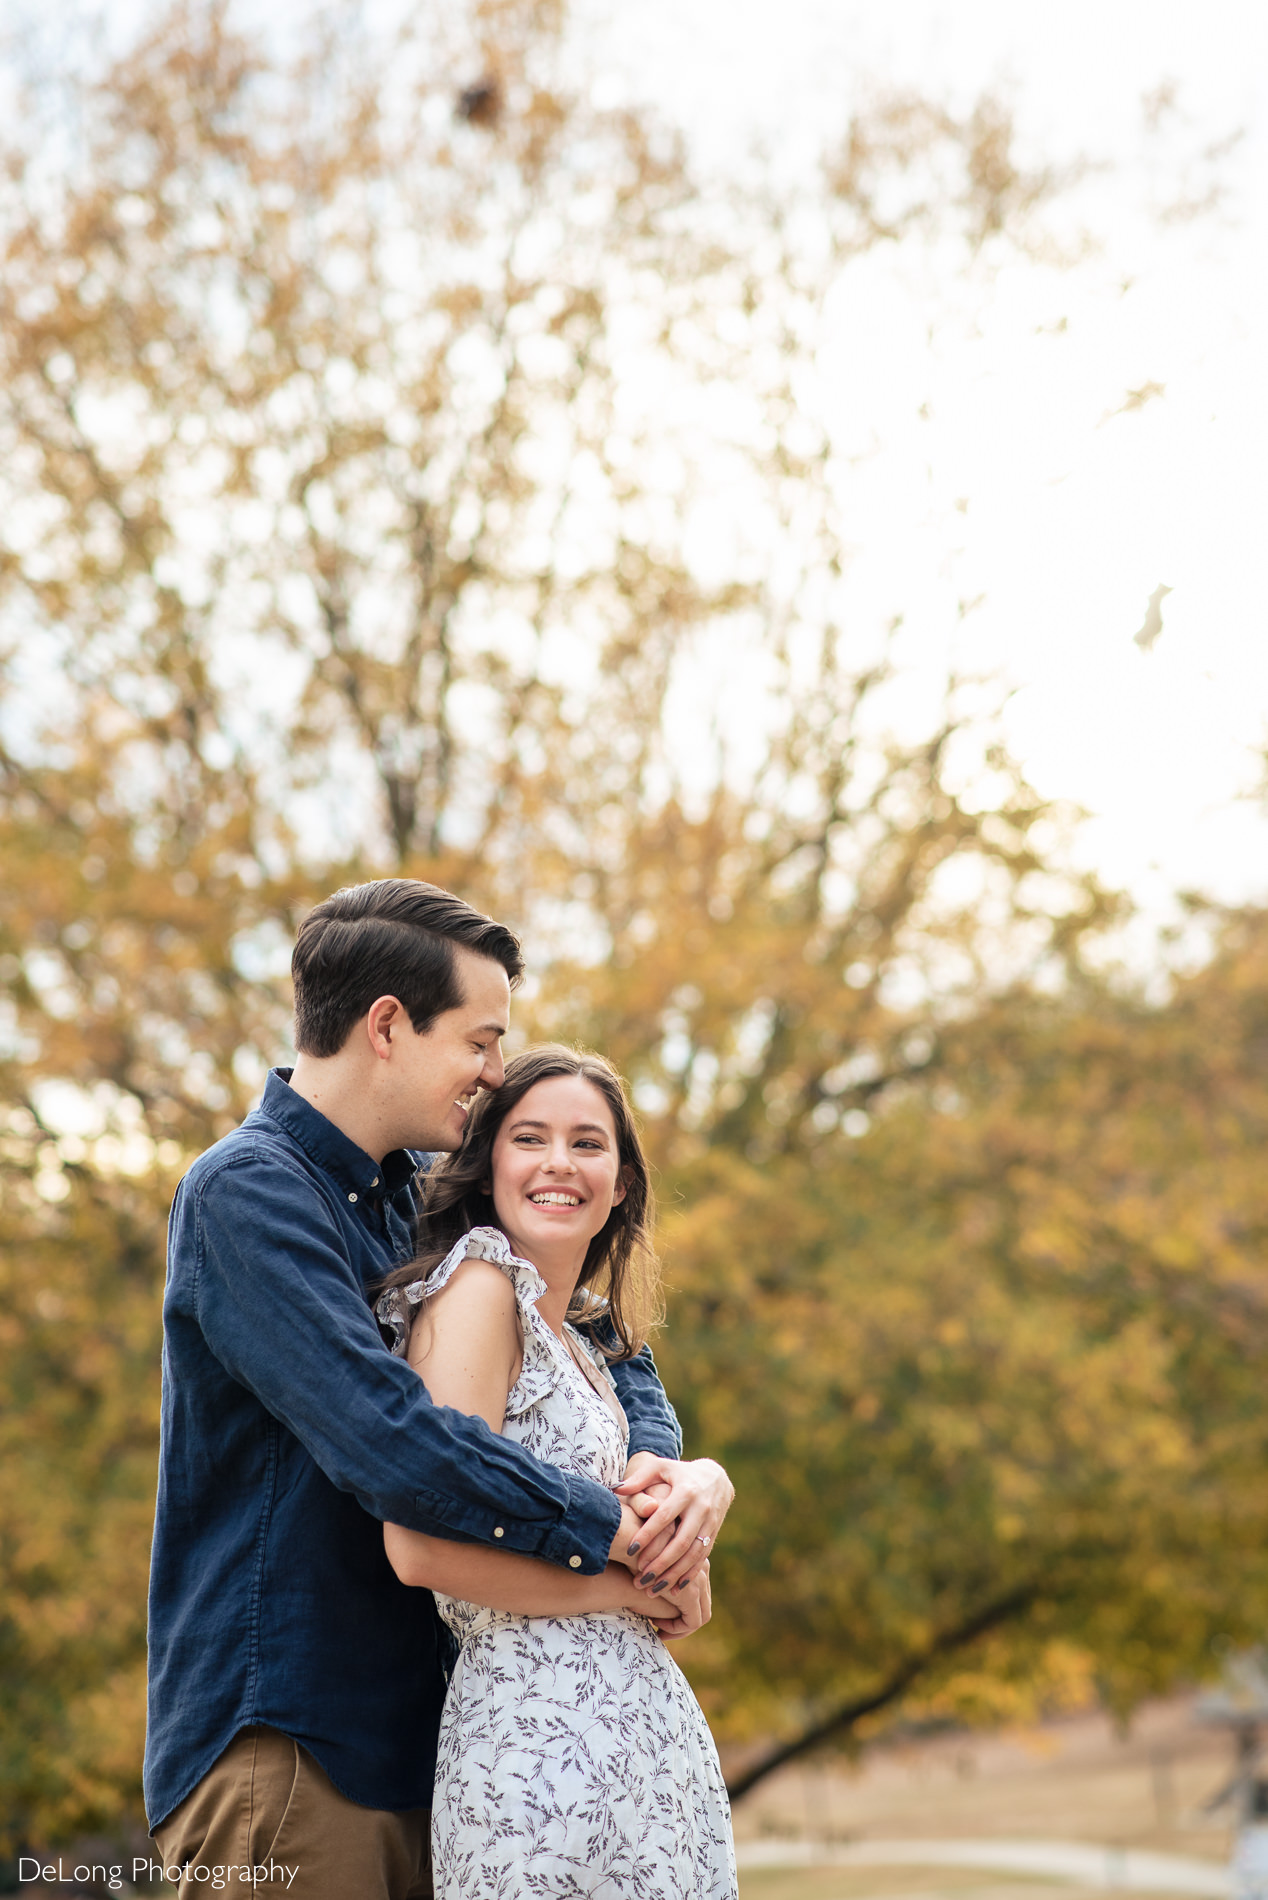 Giggling engaged couple portrait outside at a Freedom park in Charlotte, NC by Charlotte Wedding Photographers DeLong Photography